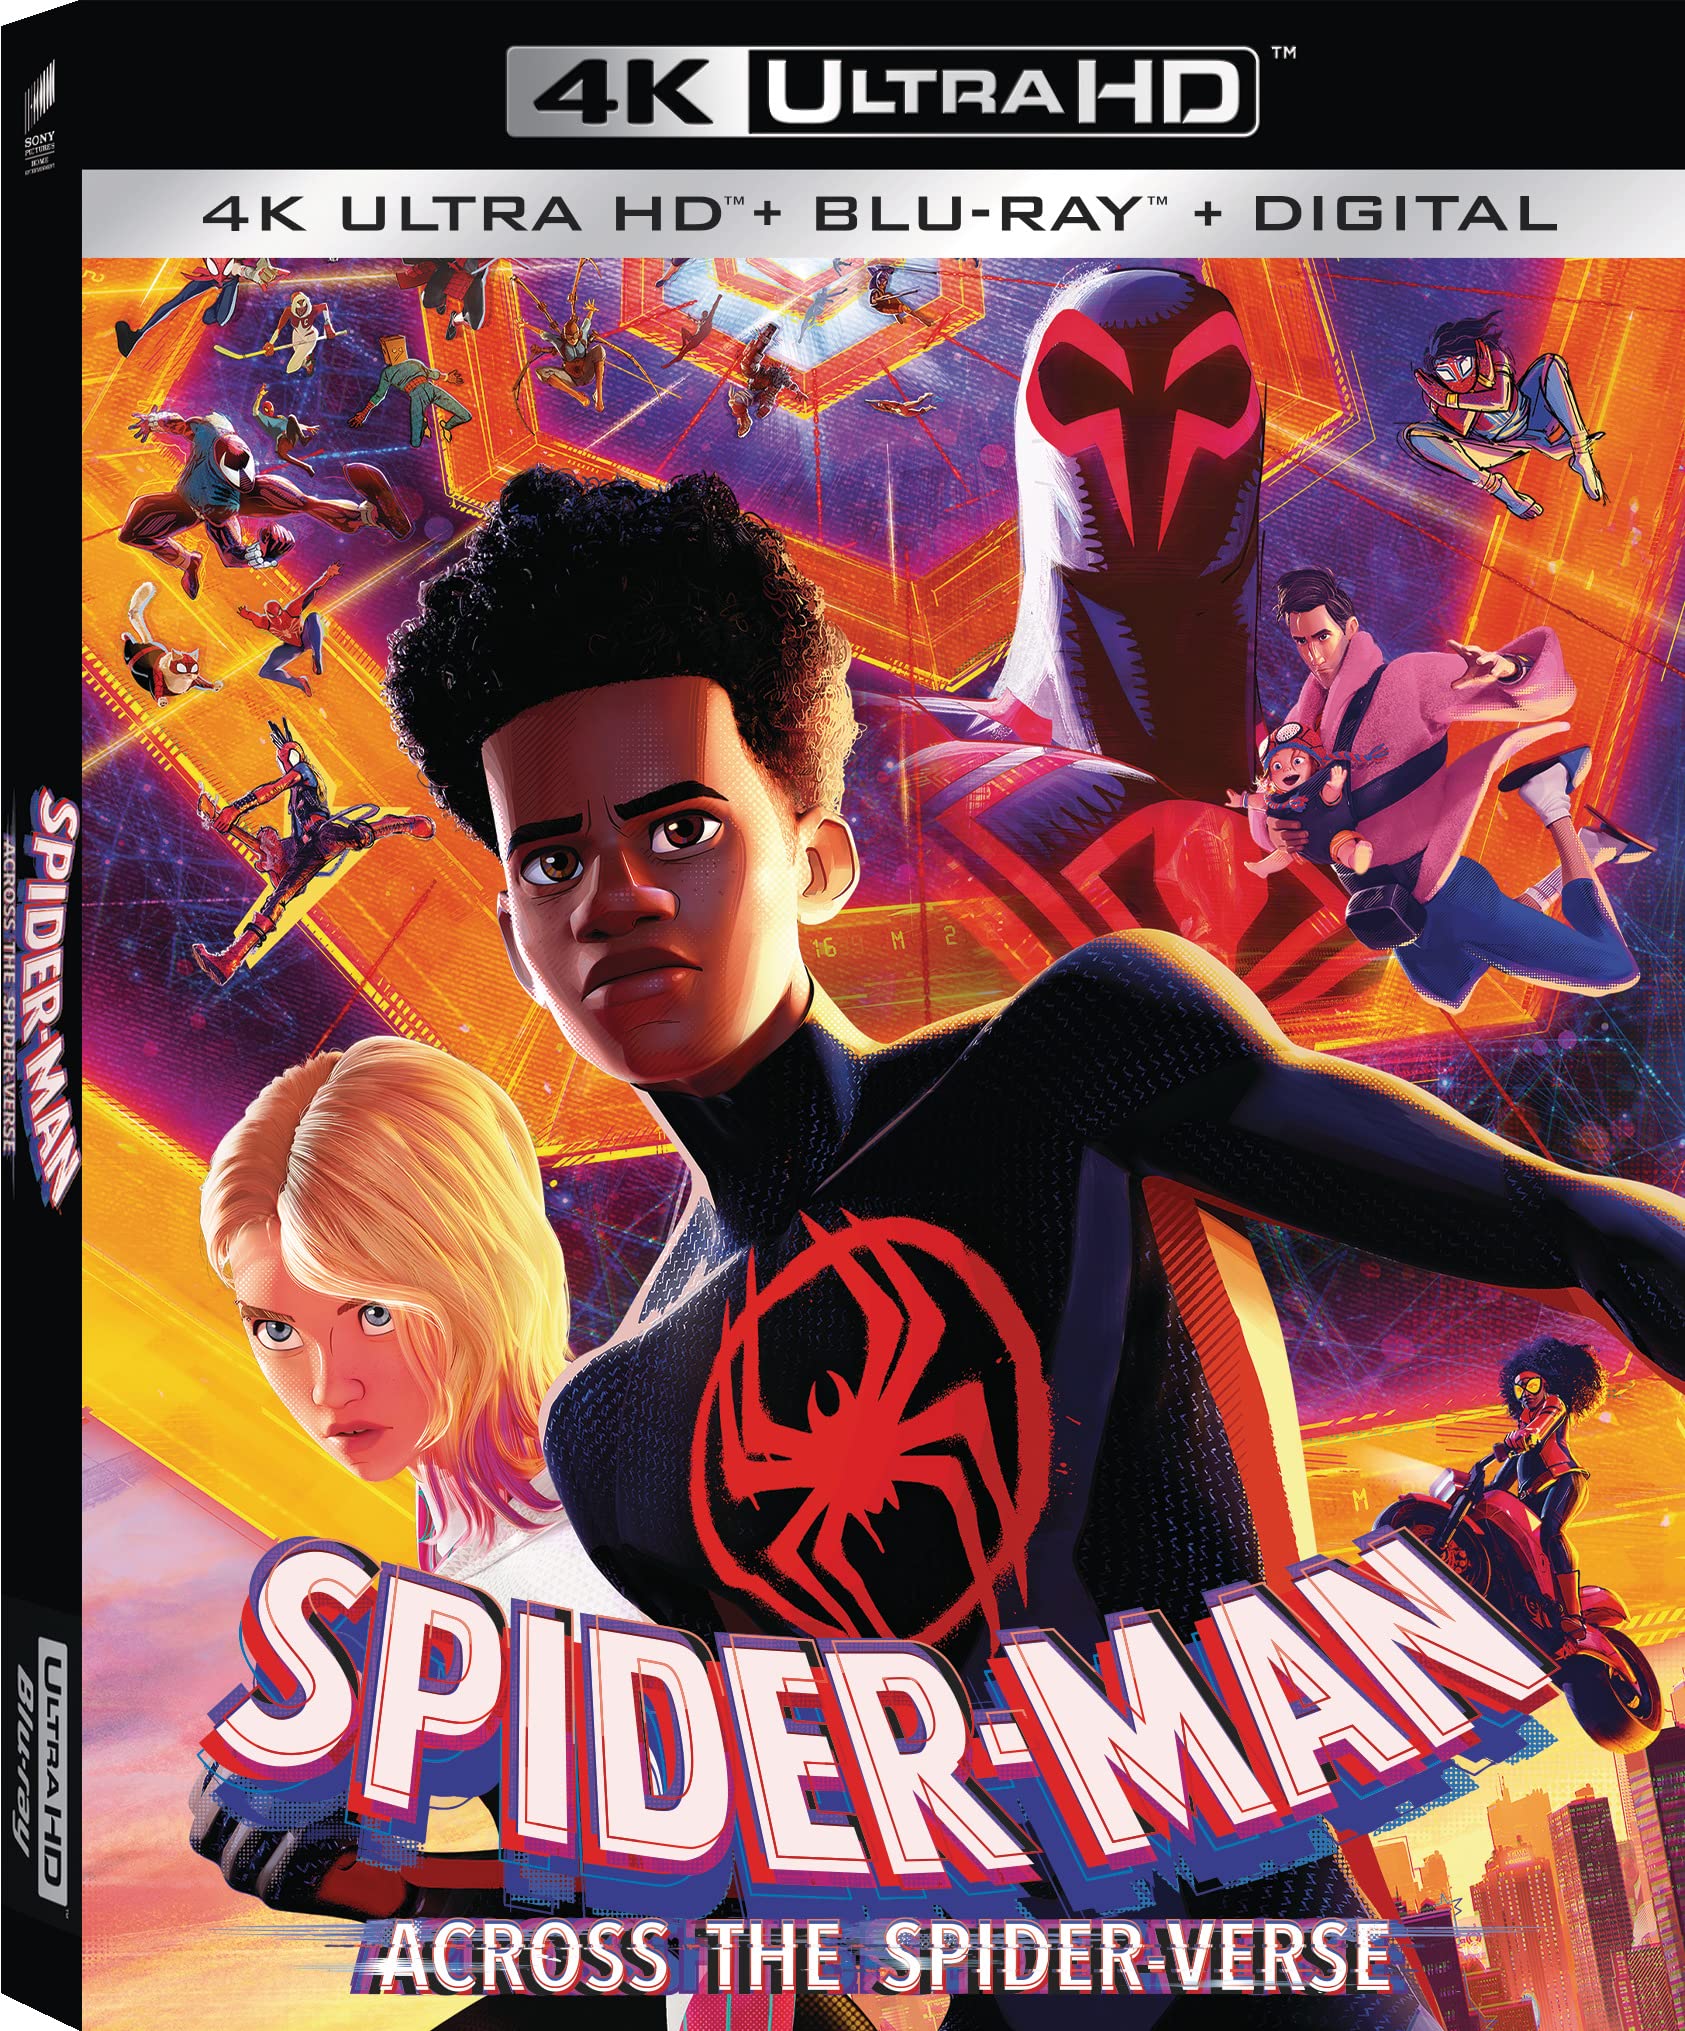 Spiderman Across The Spider-Verse movie poster (d) - Spiderman poster - 11  x 17